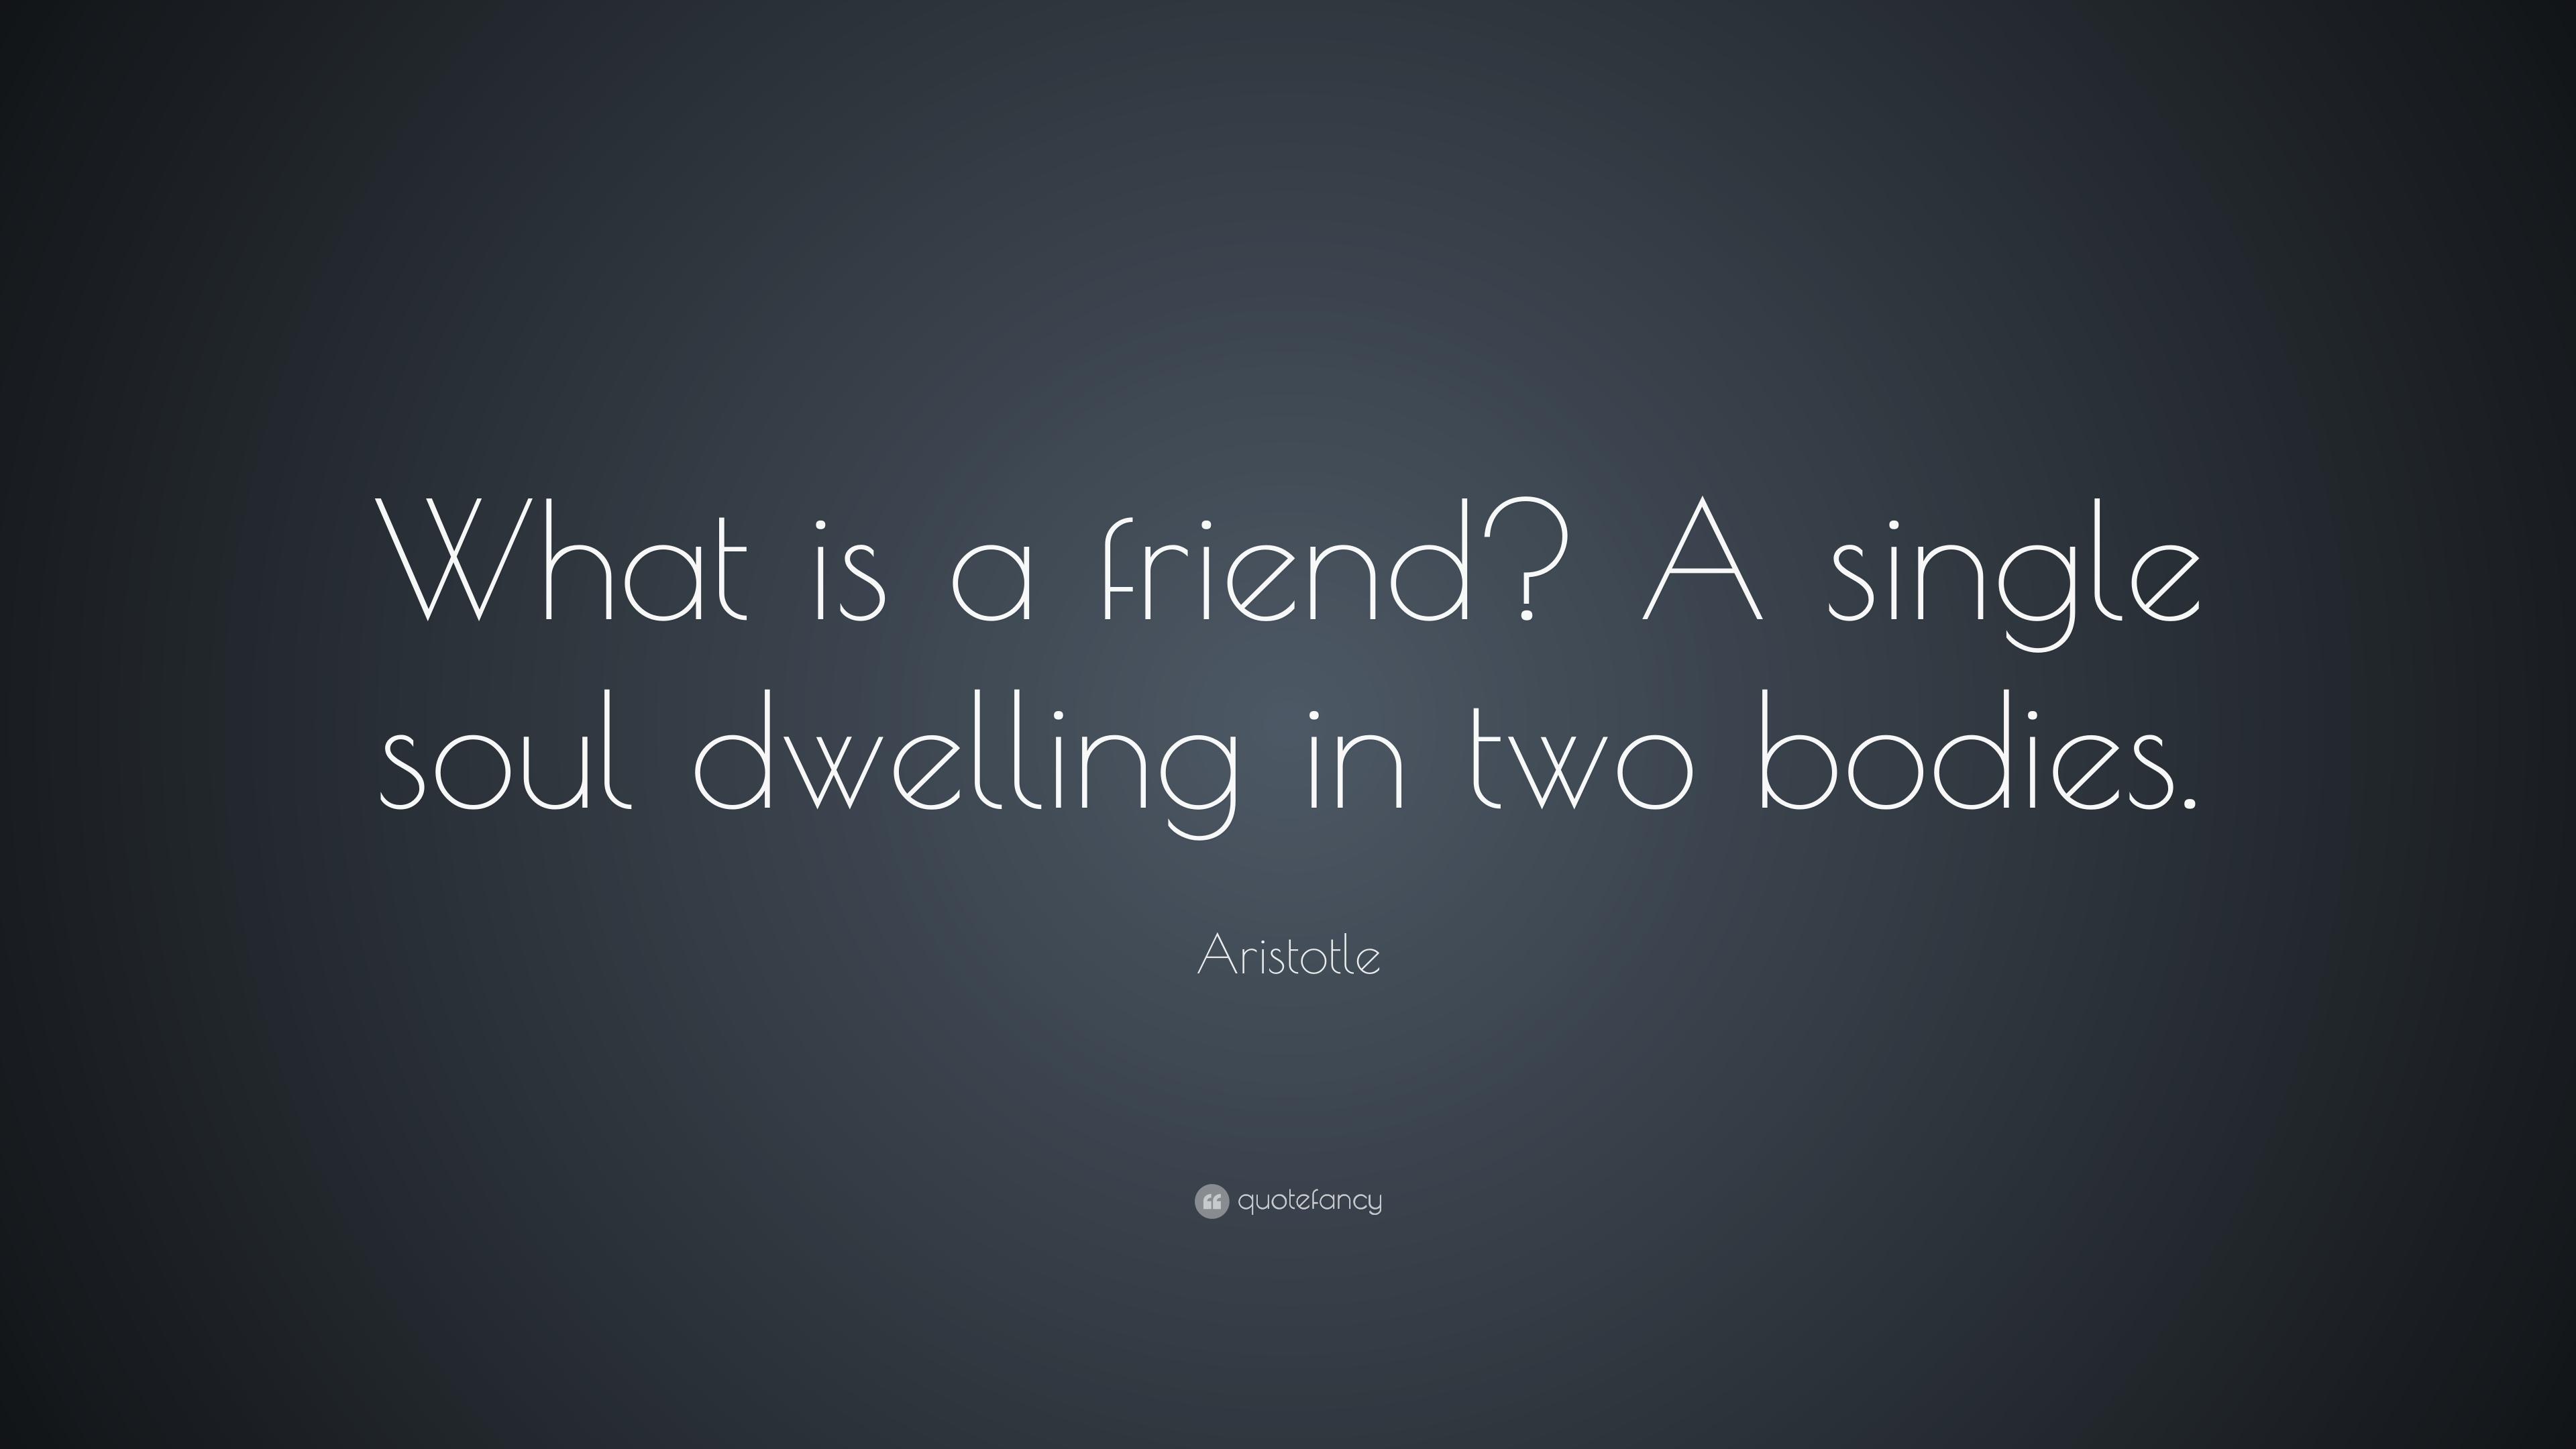 Aristotle Quote: “What is a friend? A single soul dwelling in two